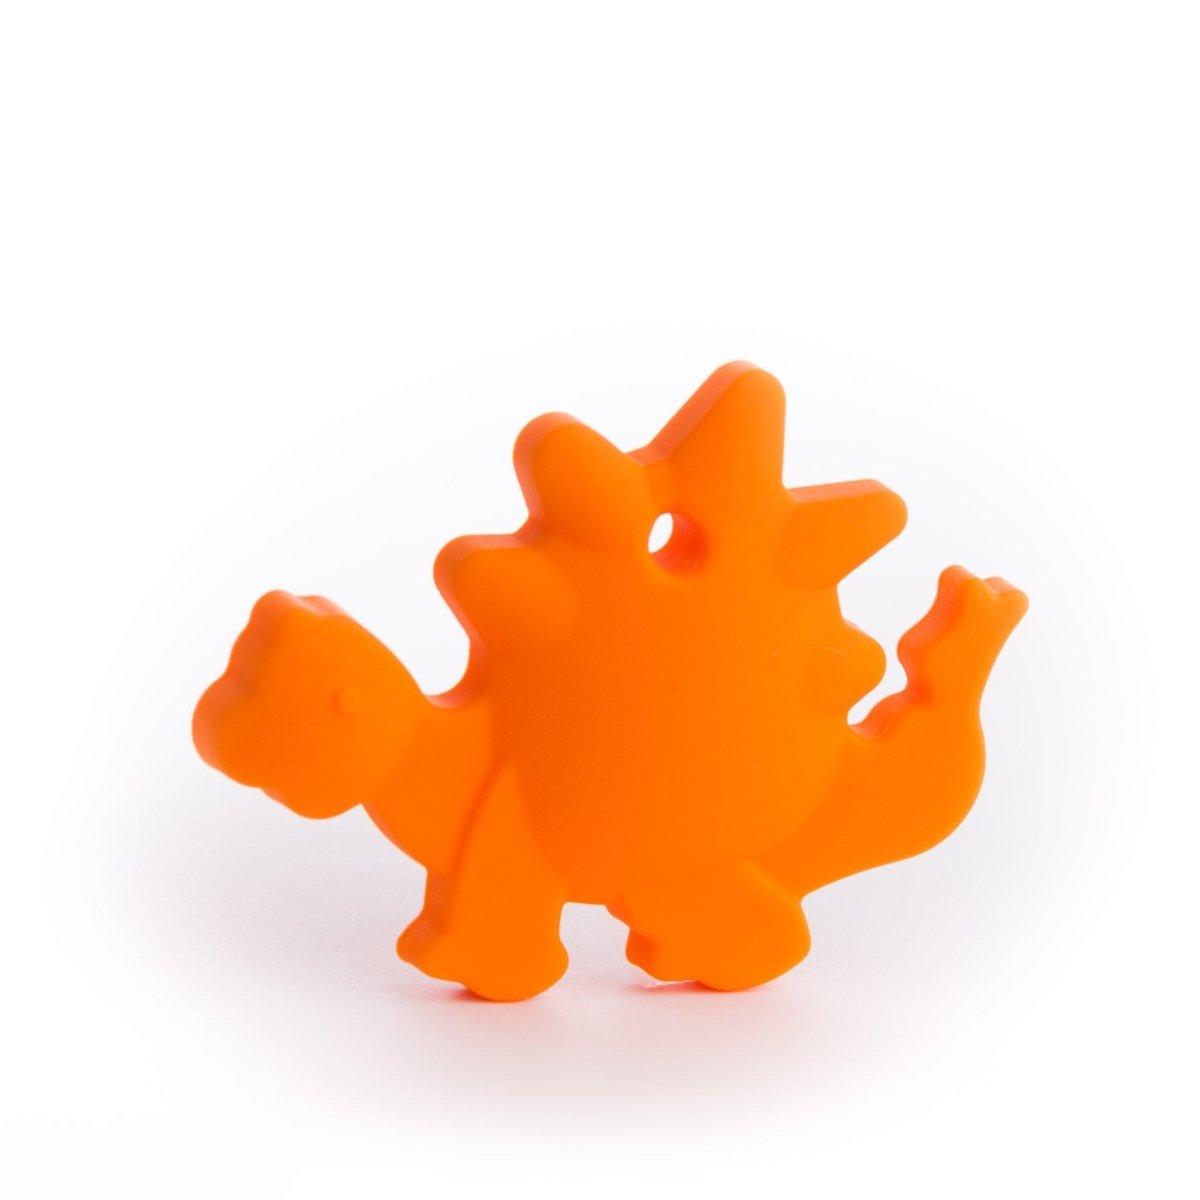 Silicone Teethers and Pendants Dinosaurs Tangerine Orange from Cara & Co Craft Supply